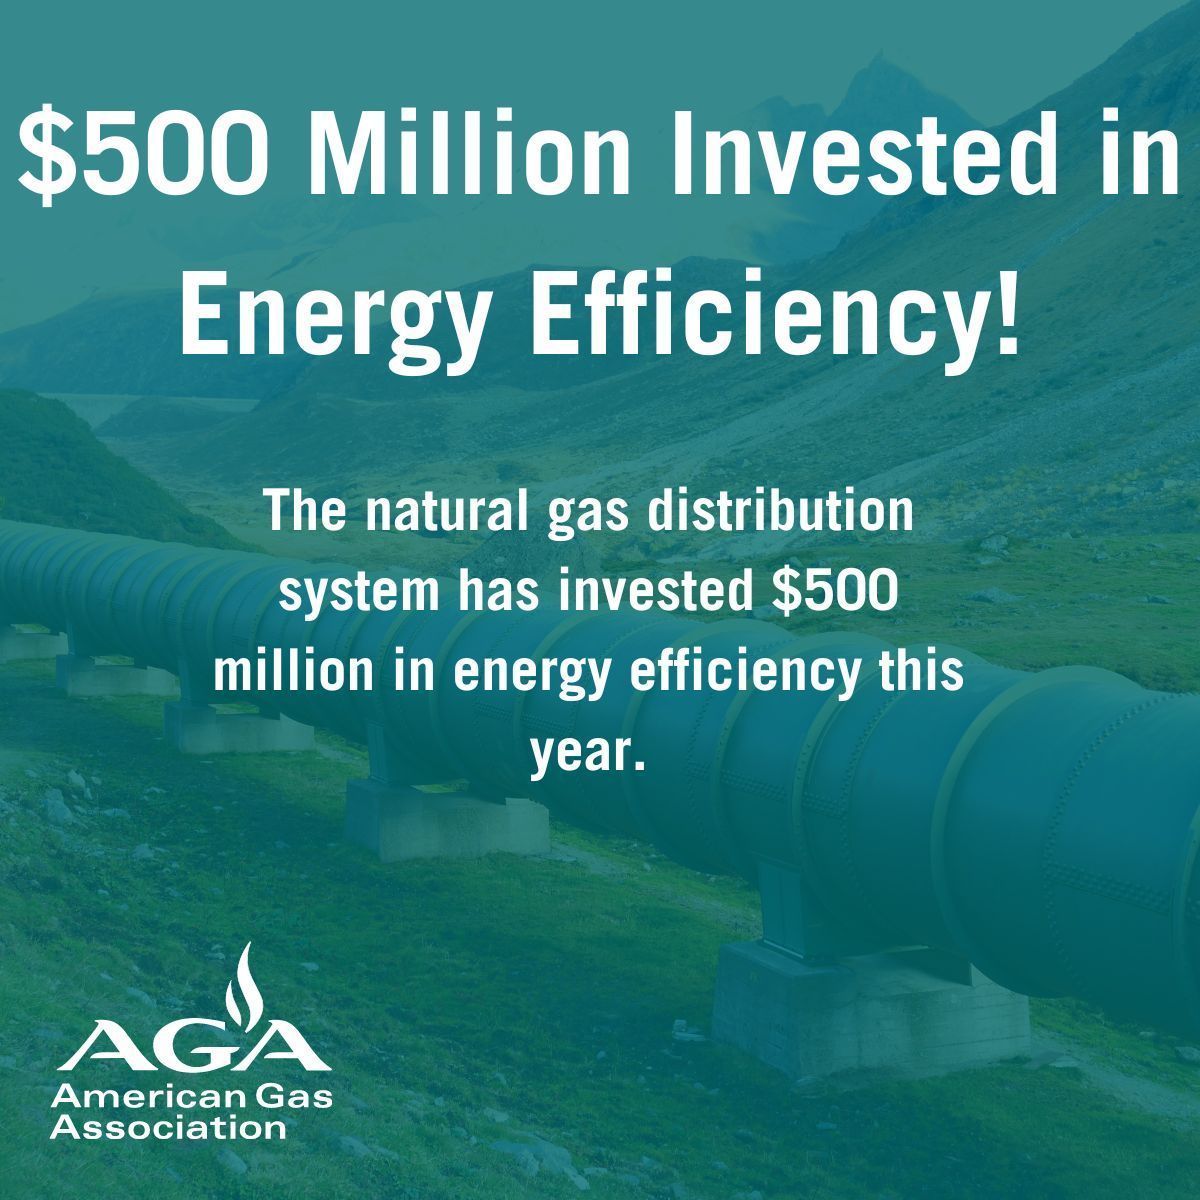 #Natgas utilities have invested $500 million in energy efficiency this year. Emissions from the natural gas distribution system have declined 70% since 1990, due theindustry's commitment to efficiency in the home & in the distribution system. Learn more: buff.ly/3LIiXoF